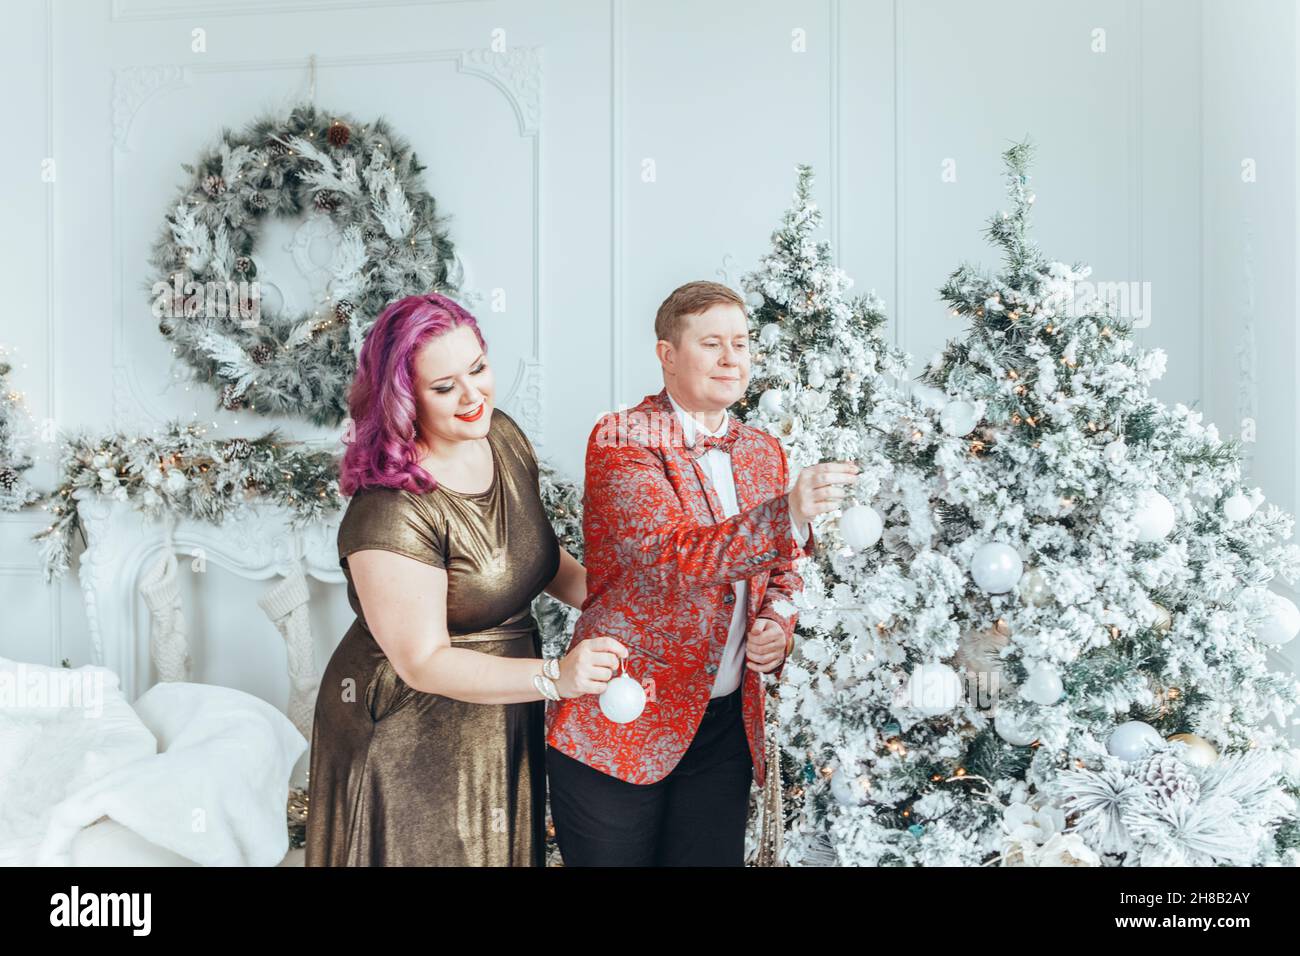 LGBTQ lesbian couple celebrating Christmas or New Year winter holiday together. Gay female lady with butch partner decorating Christmas tree at home. Stock Photo